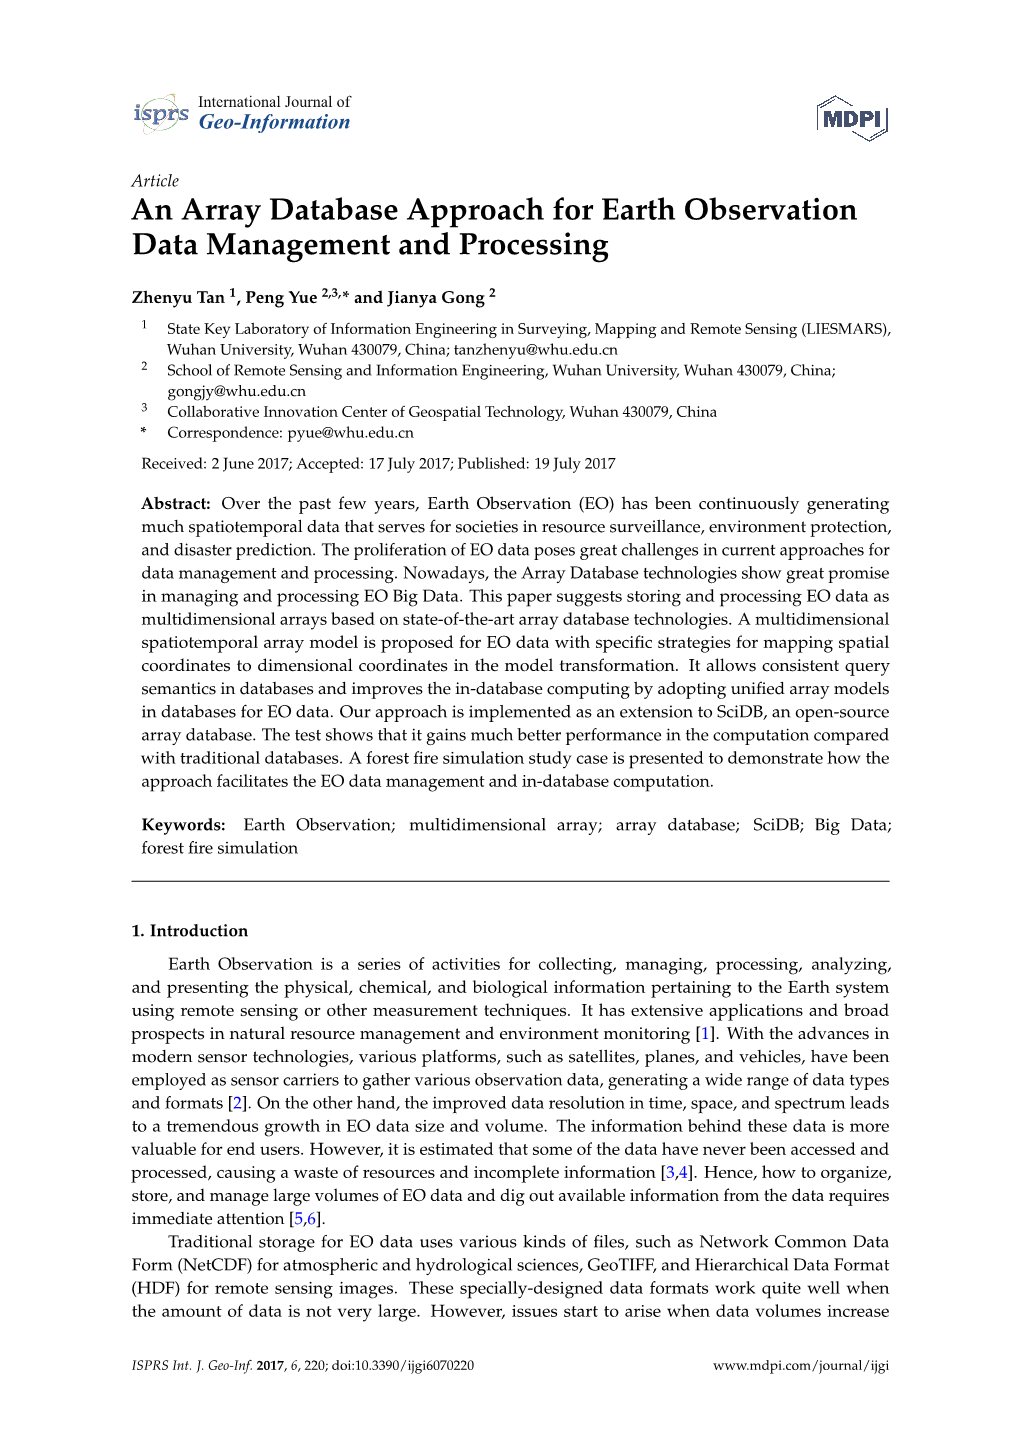 An Array Database Approach for Earth Observation Data Management and Processing